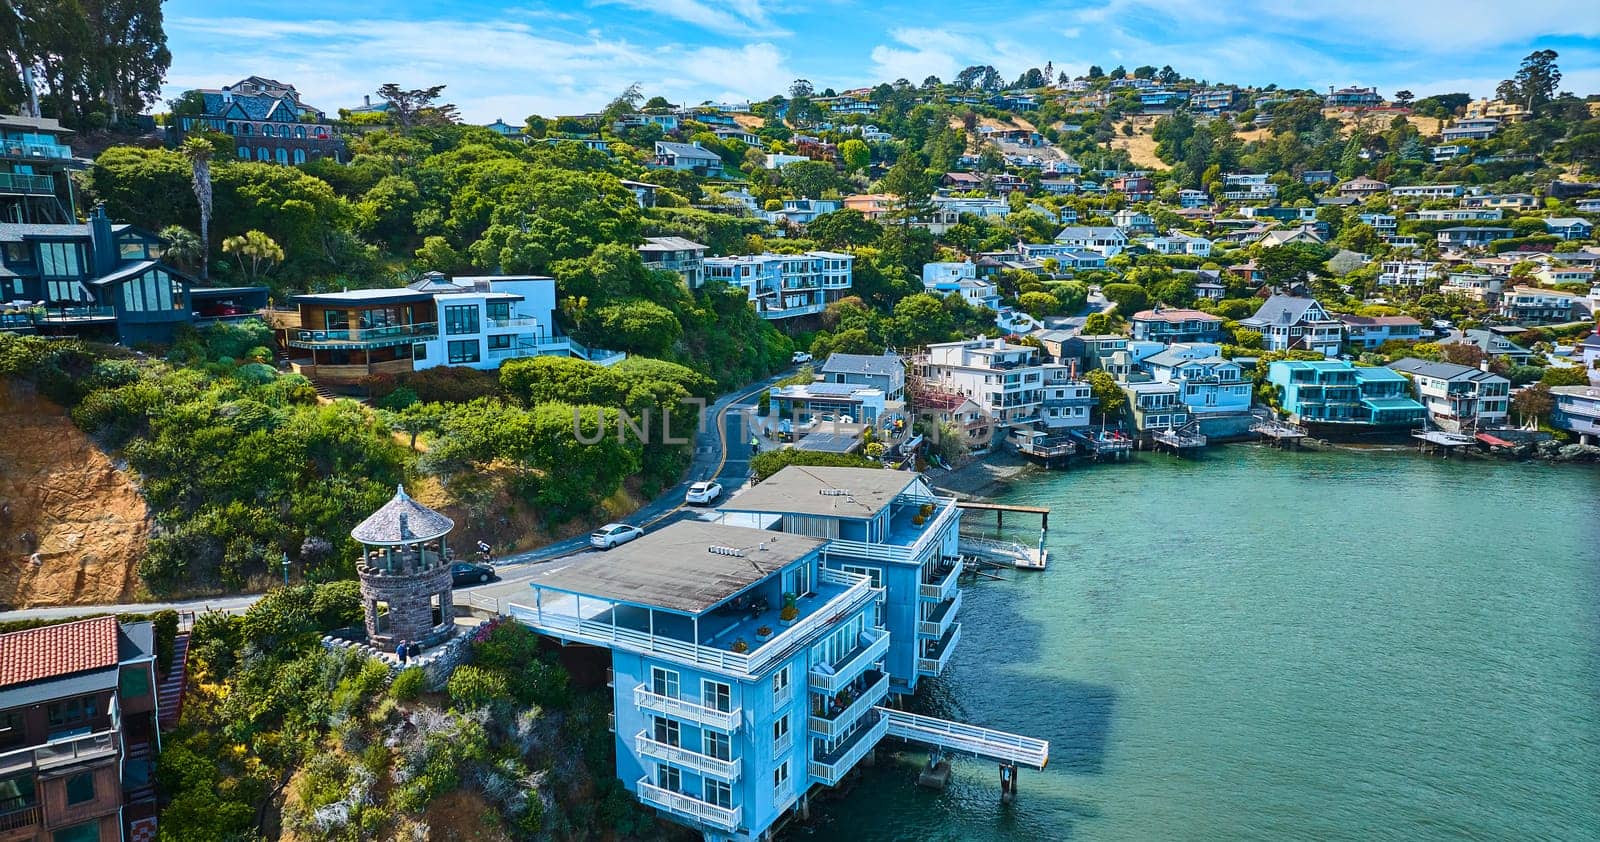 Image of Lyfords Stone Tower aerial Tiburon waterfront properties on Lyford Cove of city on hillside